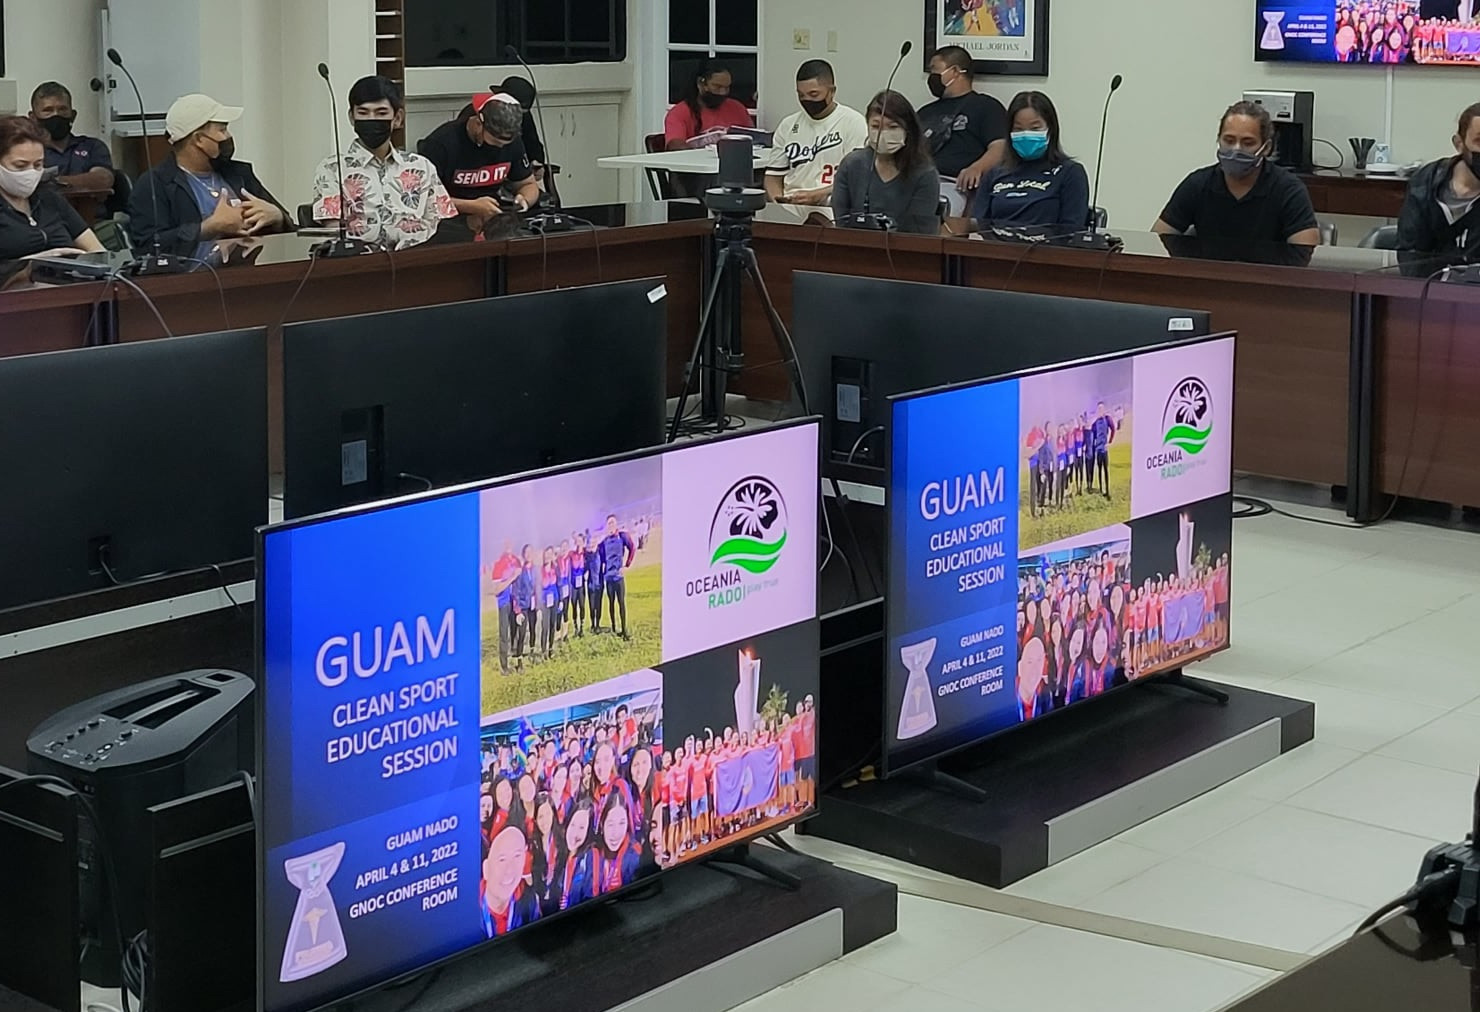 Athletes attended the Guam Clean Sport Education Session to learn about anti-doping violations ©Guam NOC